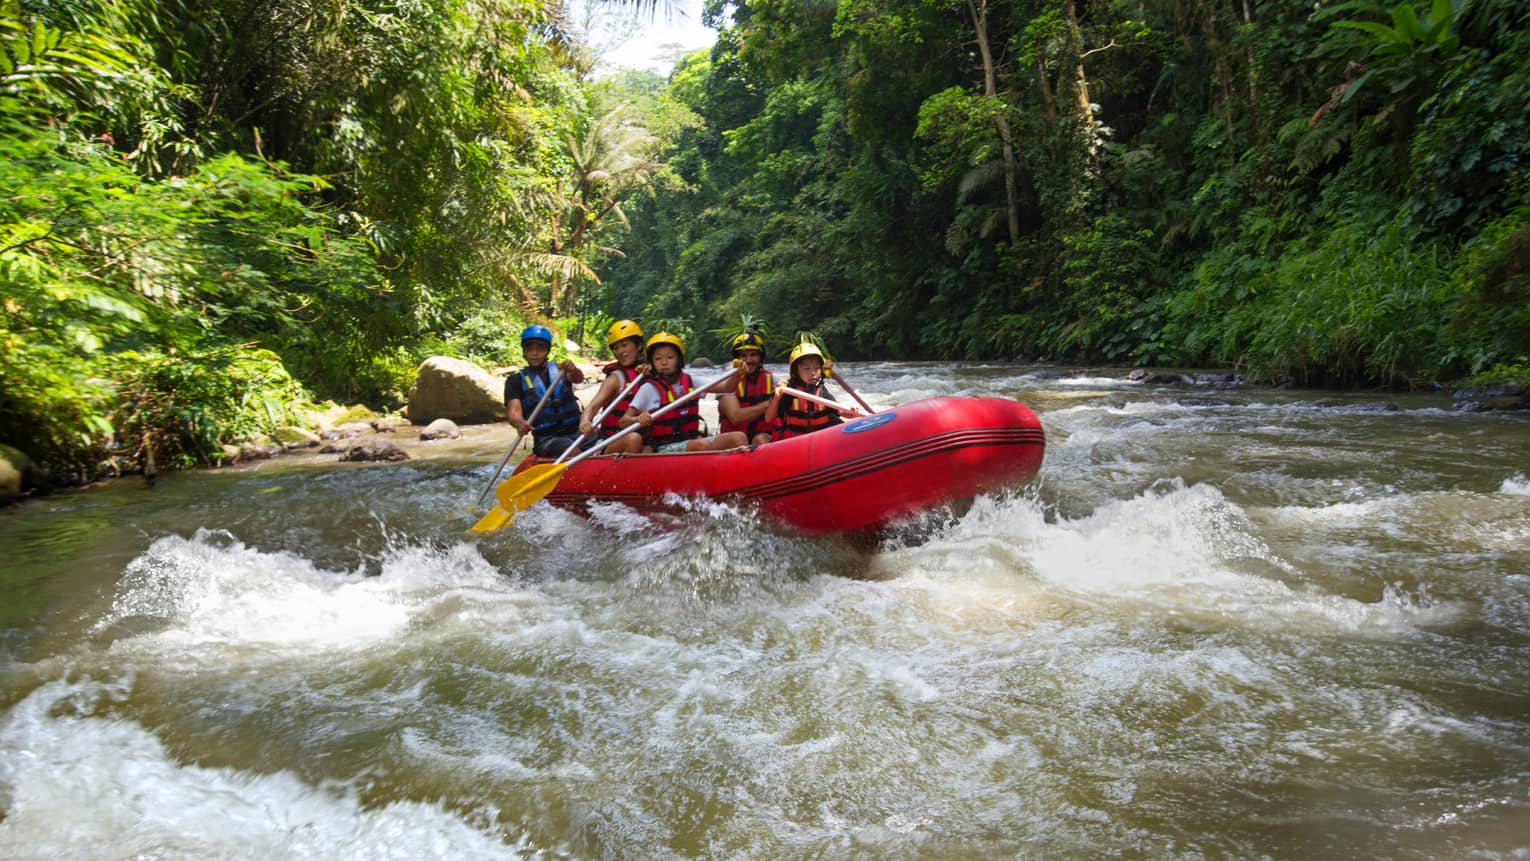 Family of four and guide hold paddles, steer red inflatable raft on rapids in river